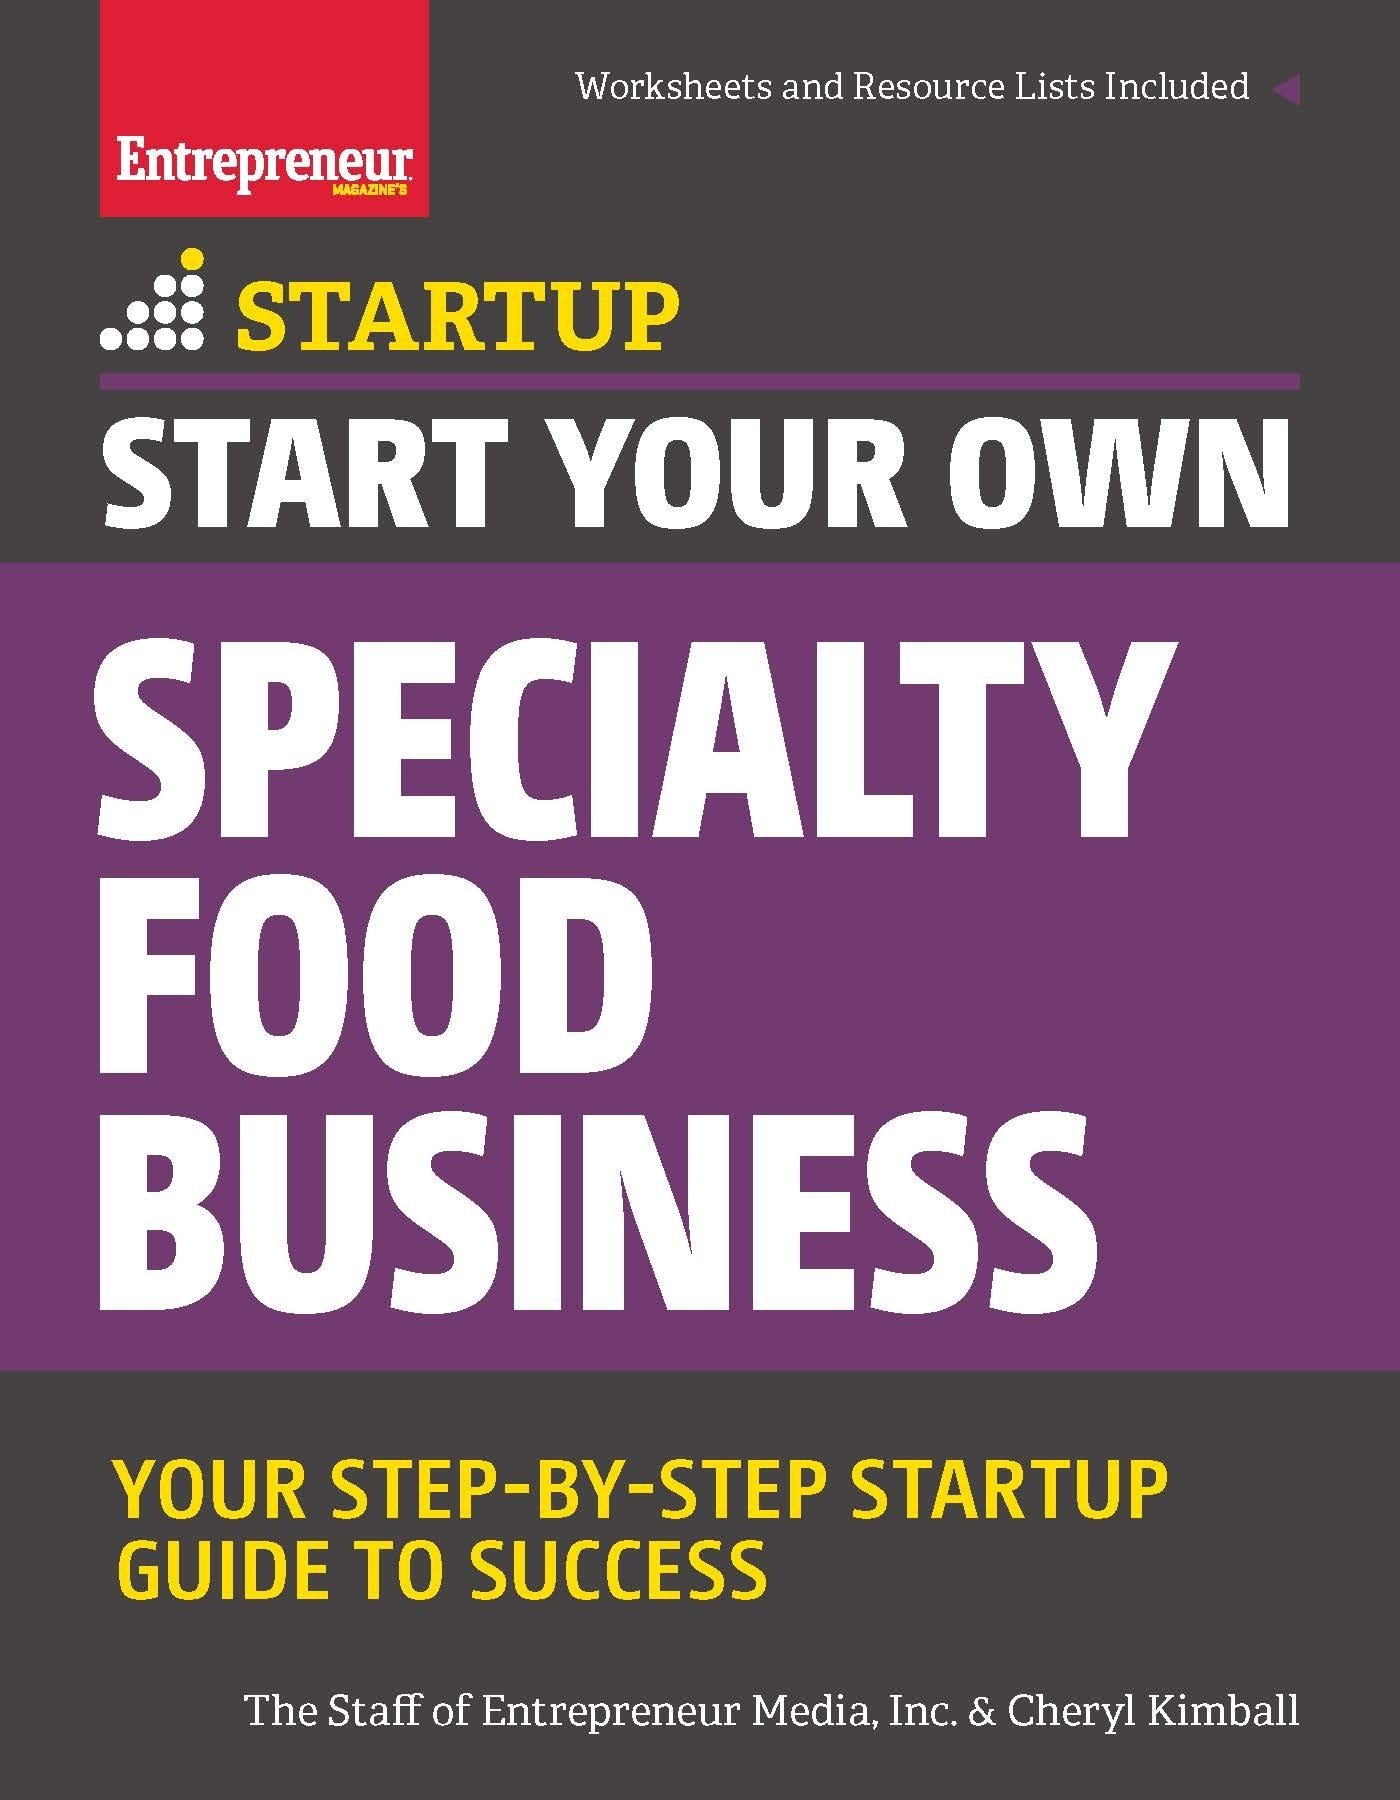 10 Great Ideas For Your Own Business start your own specialty food business 2022